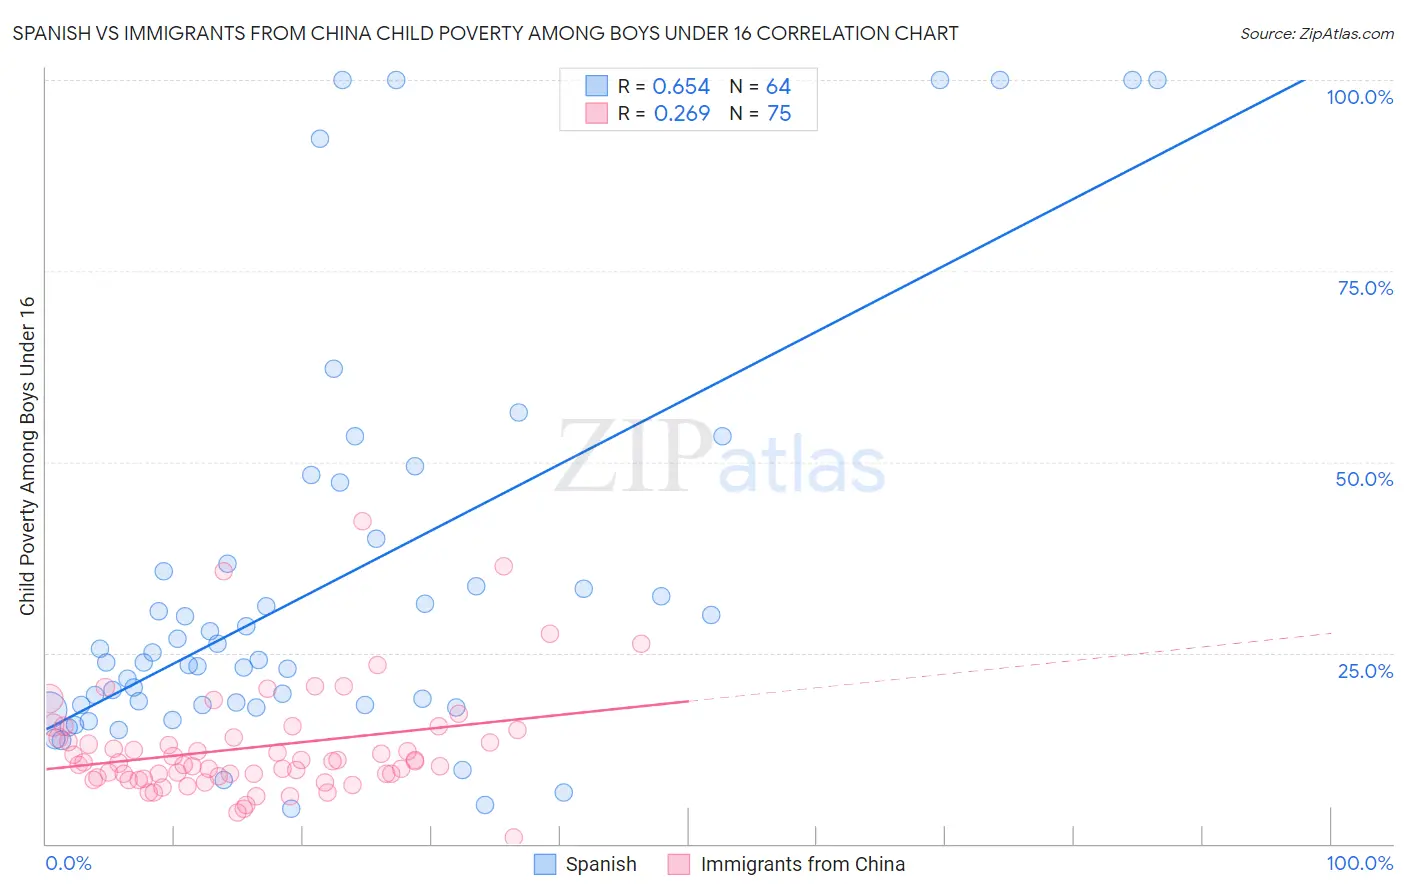 Spanish vs Immigrants from China Child Poverty Among Boys Under 16